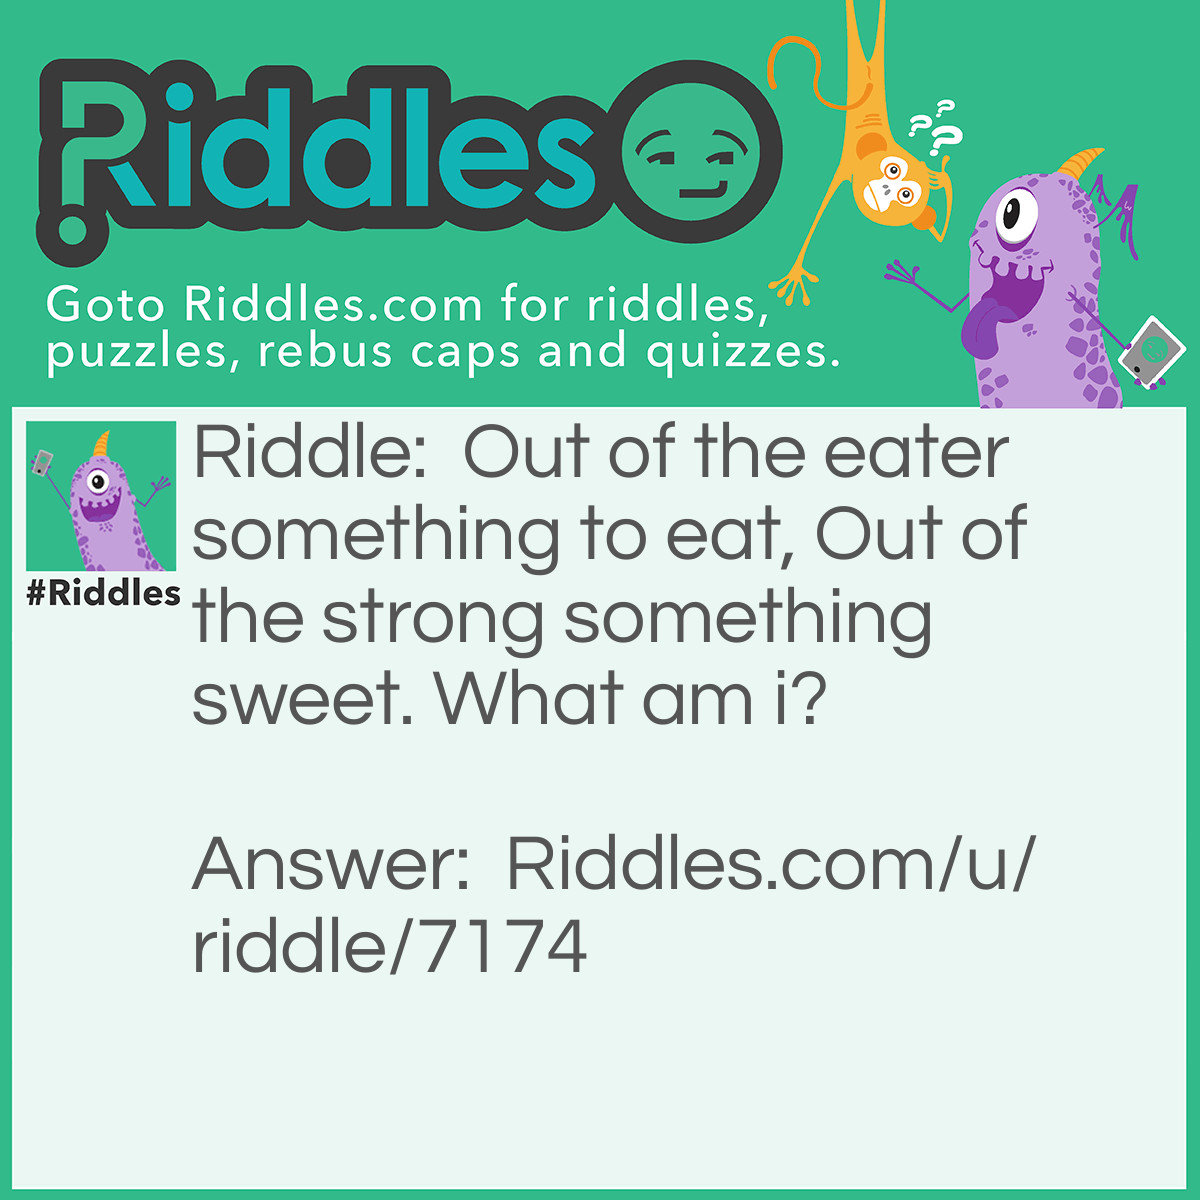 Riddle: Out of the eater something to eat, Out of the strong something sweet. What am I? Answer: A Lion and Honey.